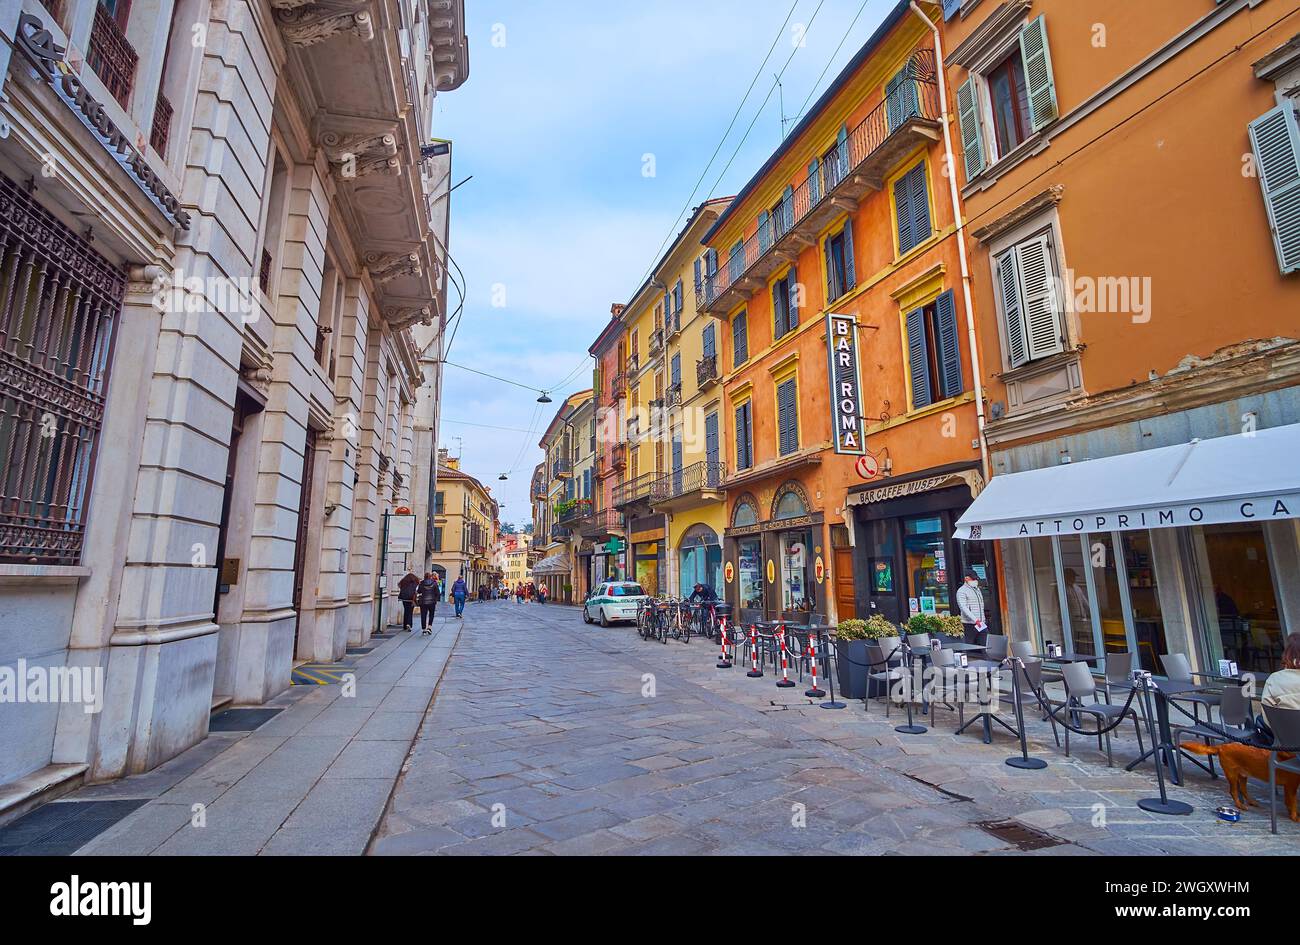 Historic Corso Giuseppe Mazzini Street with restaurants, cafes, bars and shops in medieval buildings, Cremona, Italy Stock Photo